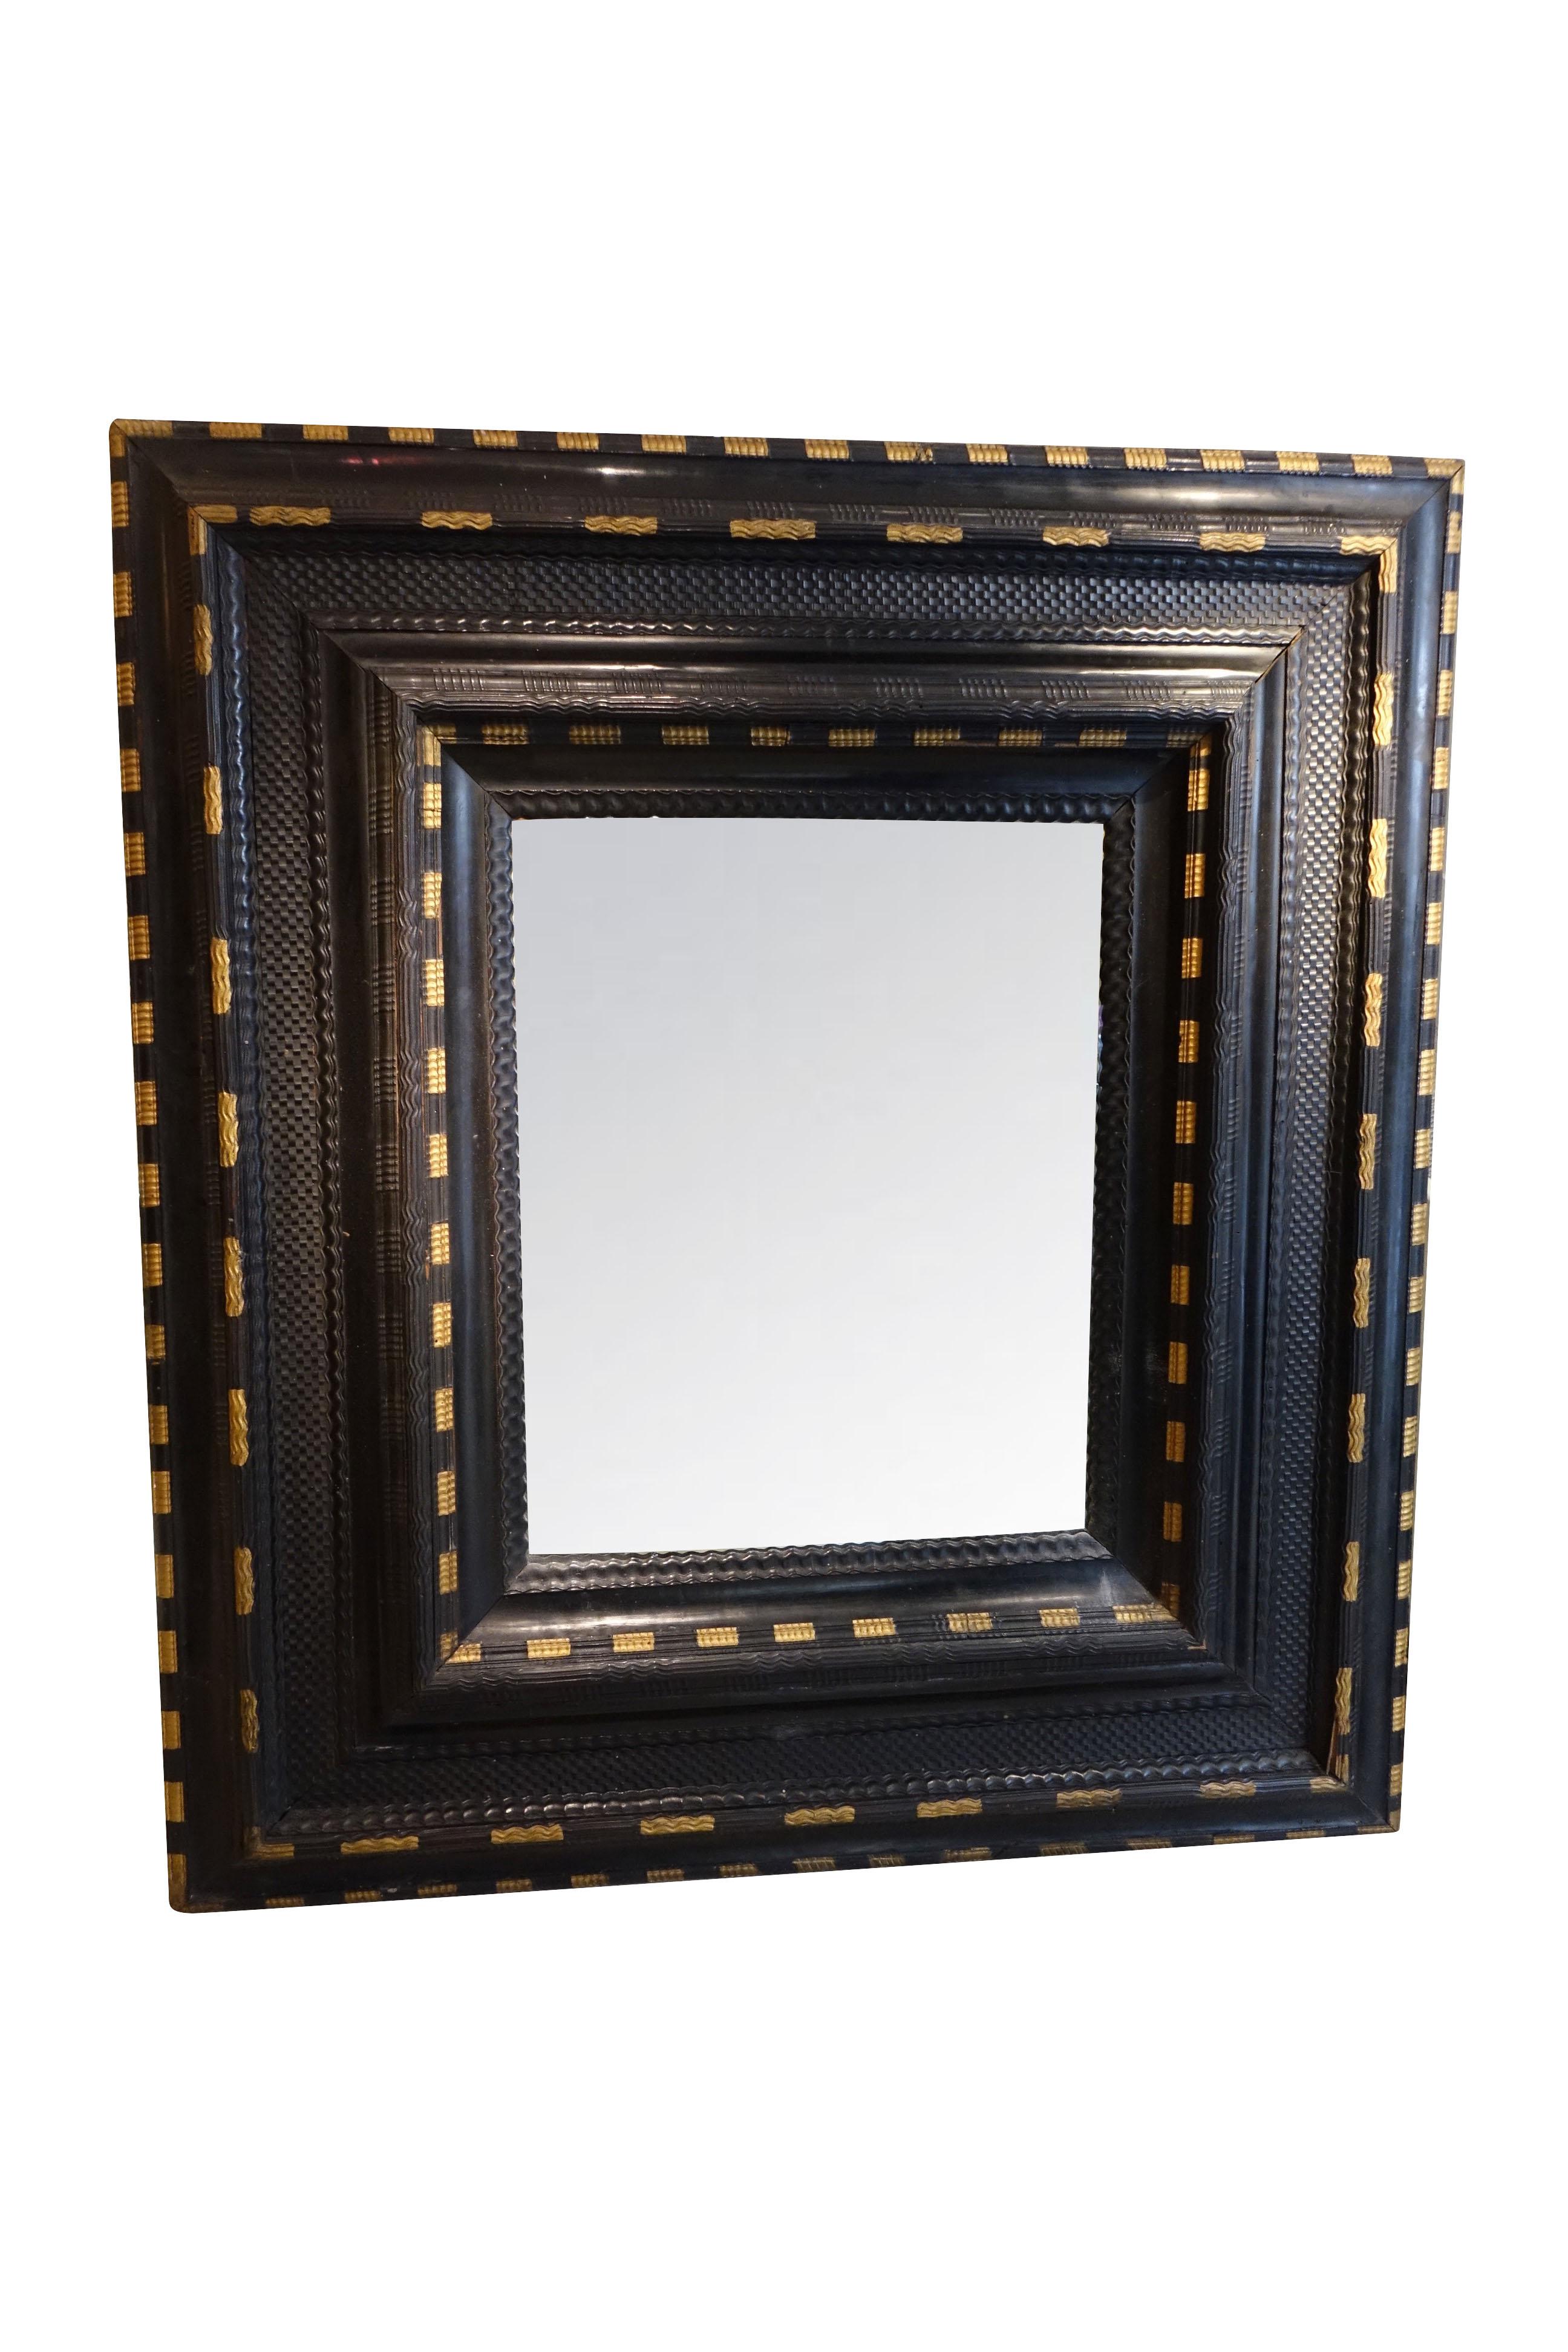 A large ebonized wood mirror with a wide framework decorated with doucines and mouldings with a guilloche pattern.
A original mercury glass in the center, gold-plated highlights on inside and outside of the mouldings.
Parquet work on the